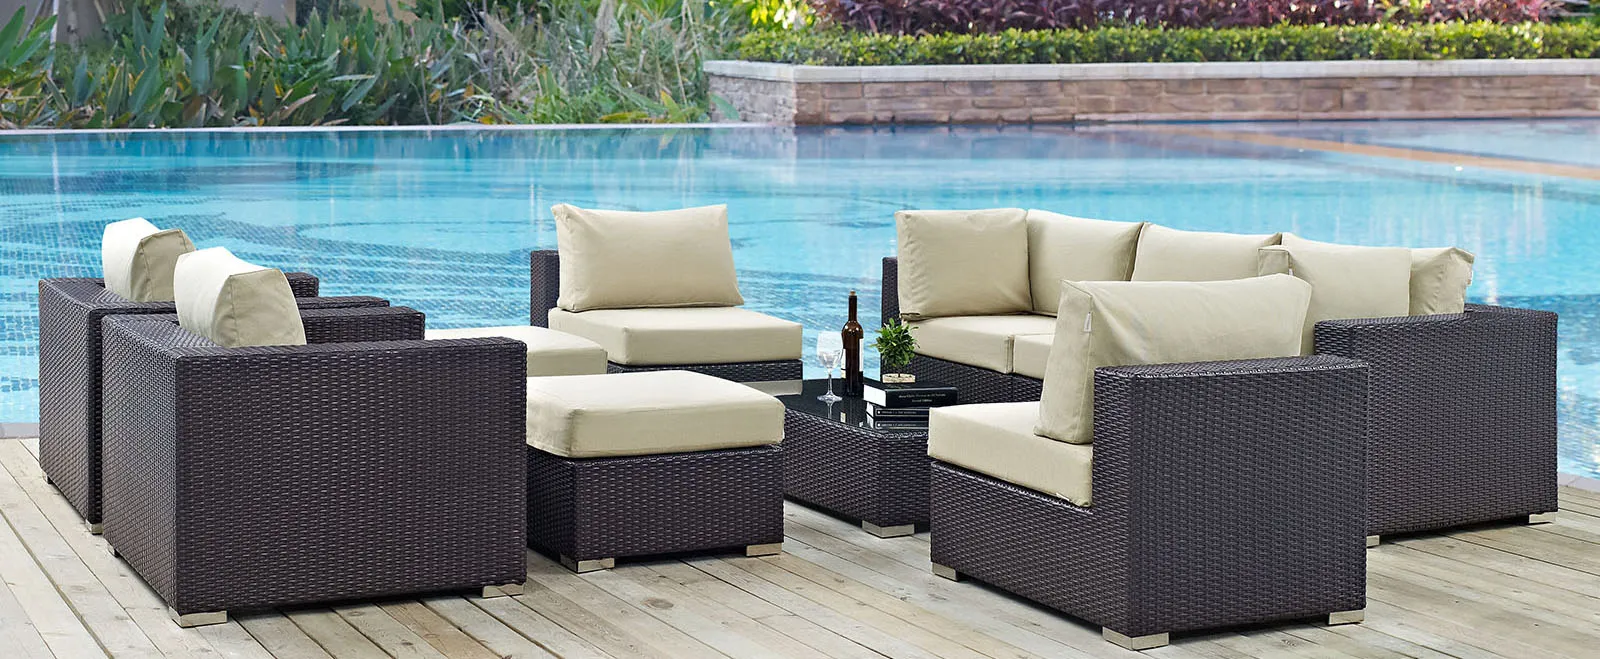 Outdooor furniture set with ottomen, table, chairs, and couch.